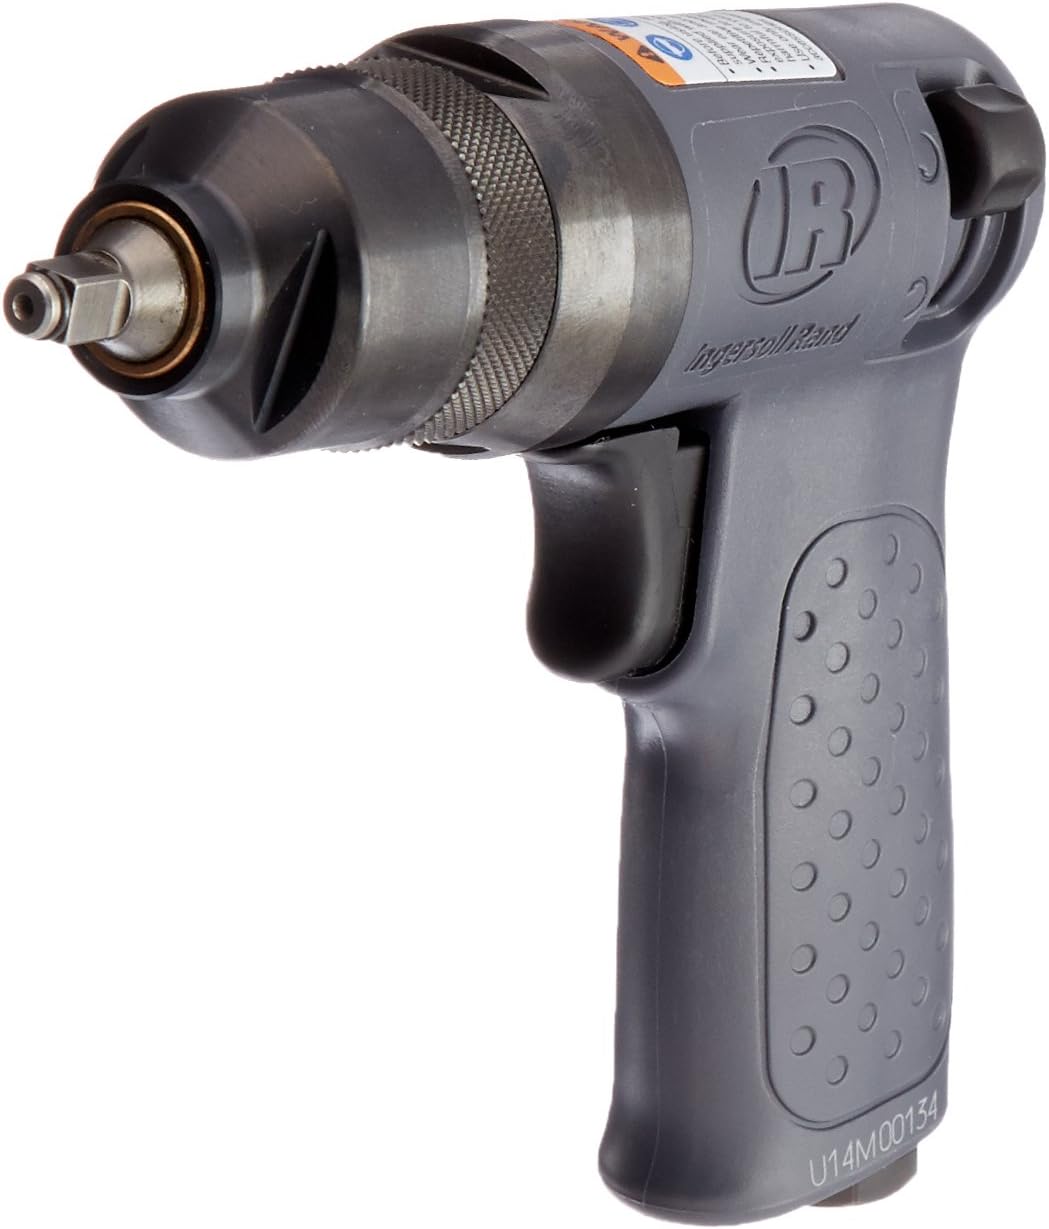 Ingersoll Rand 2101XP Air Impact Wrench